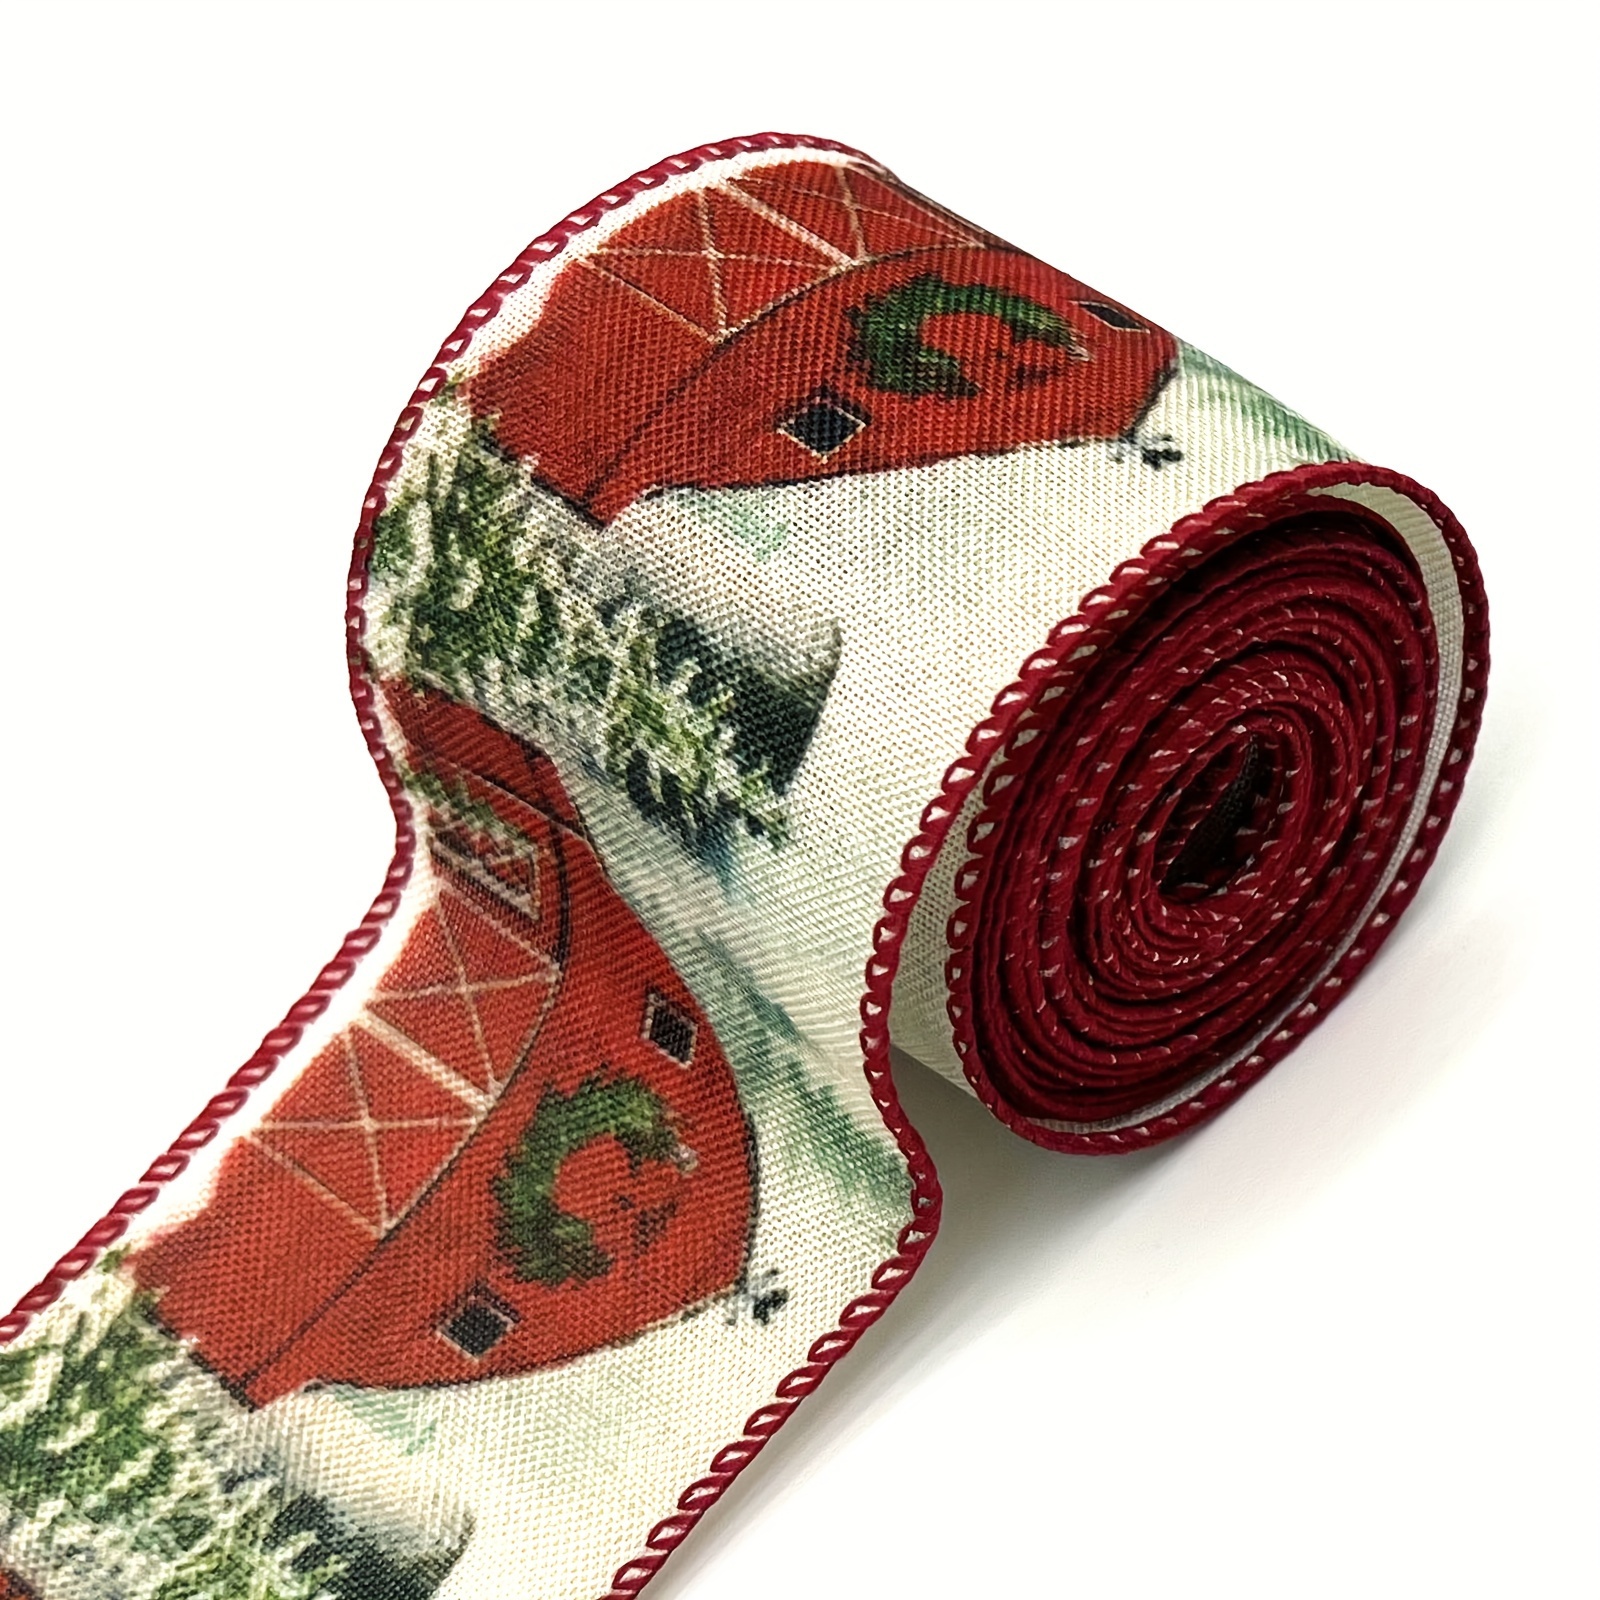 Red Wired Fabric Florist Ribbon, 1-1/2 x 50 yards